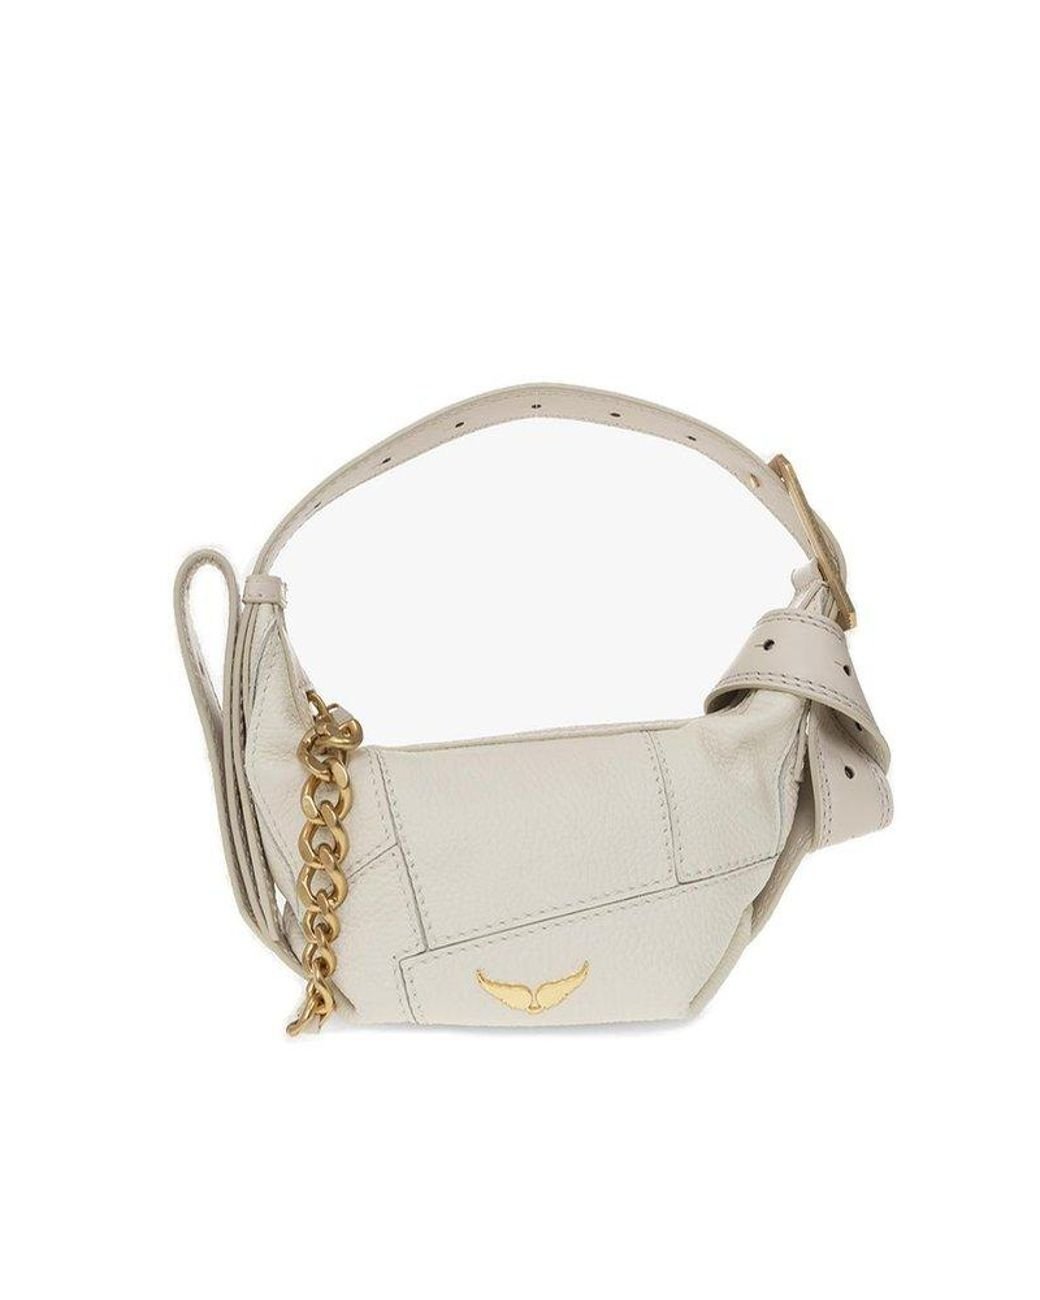 Zadig & Voltaire Le Cecilia Xs Patchwork Shoulder Bag in White | Lyst